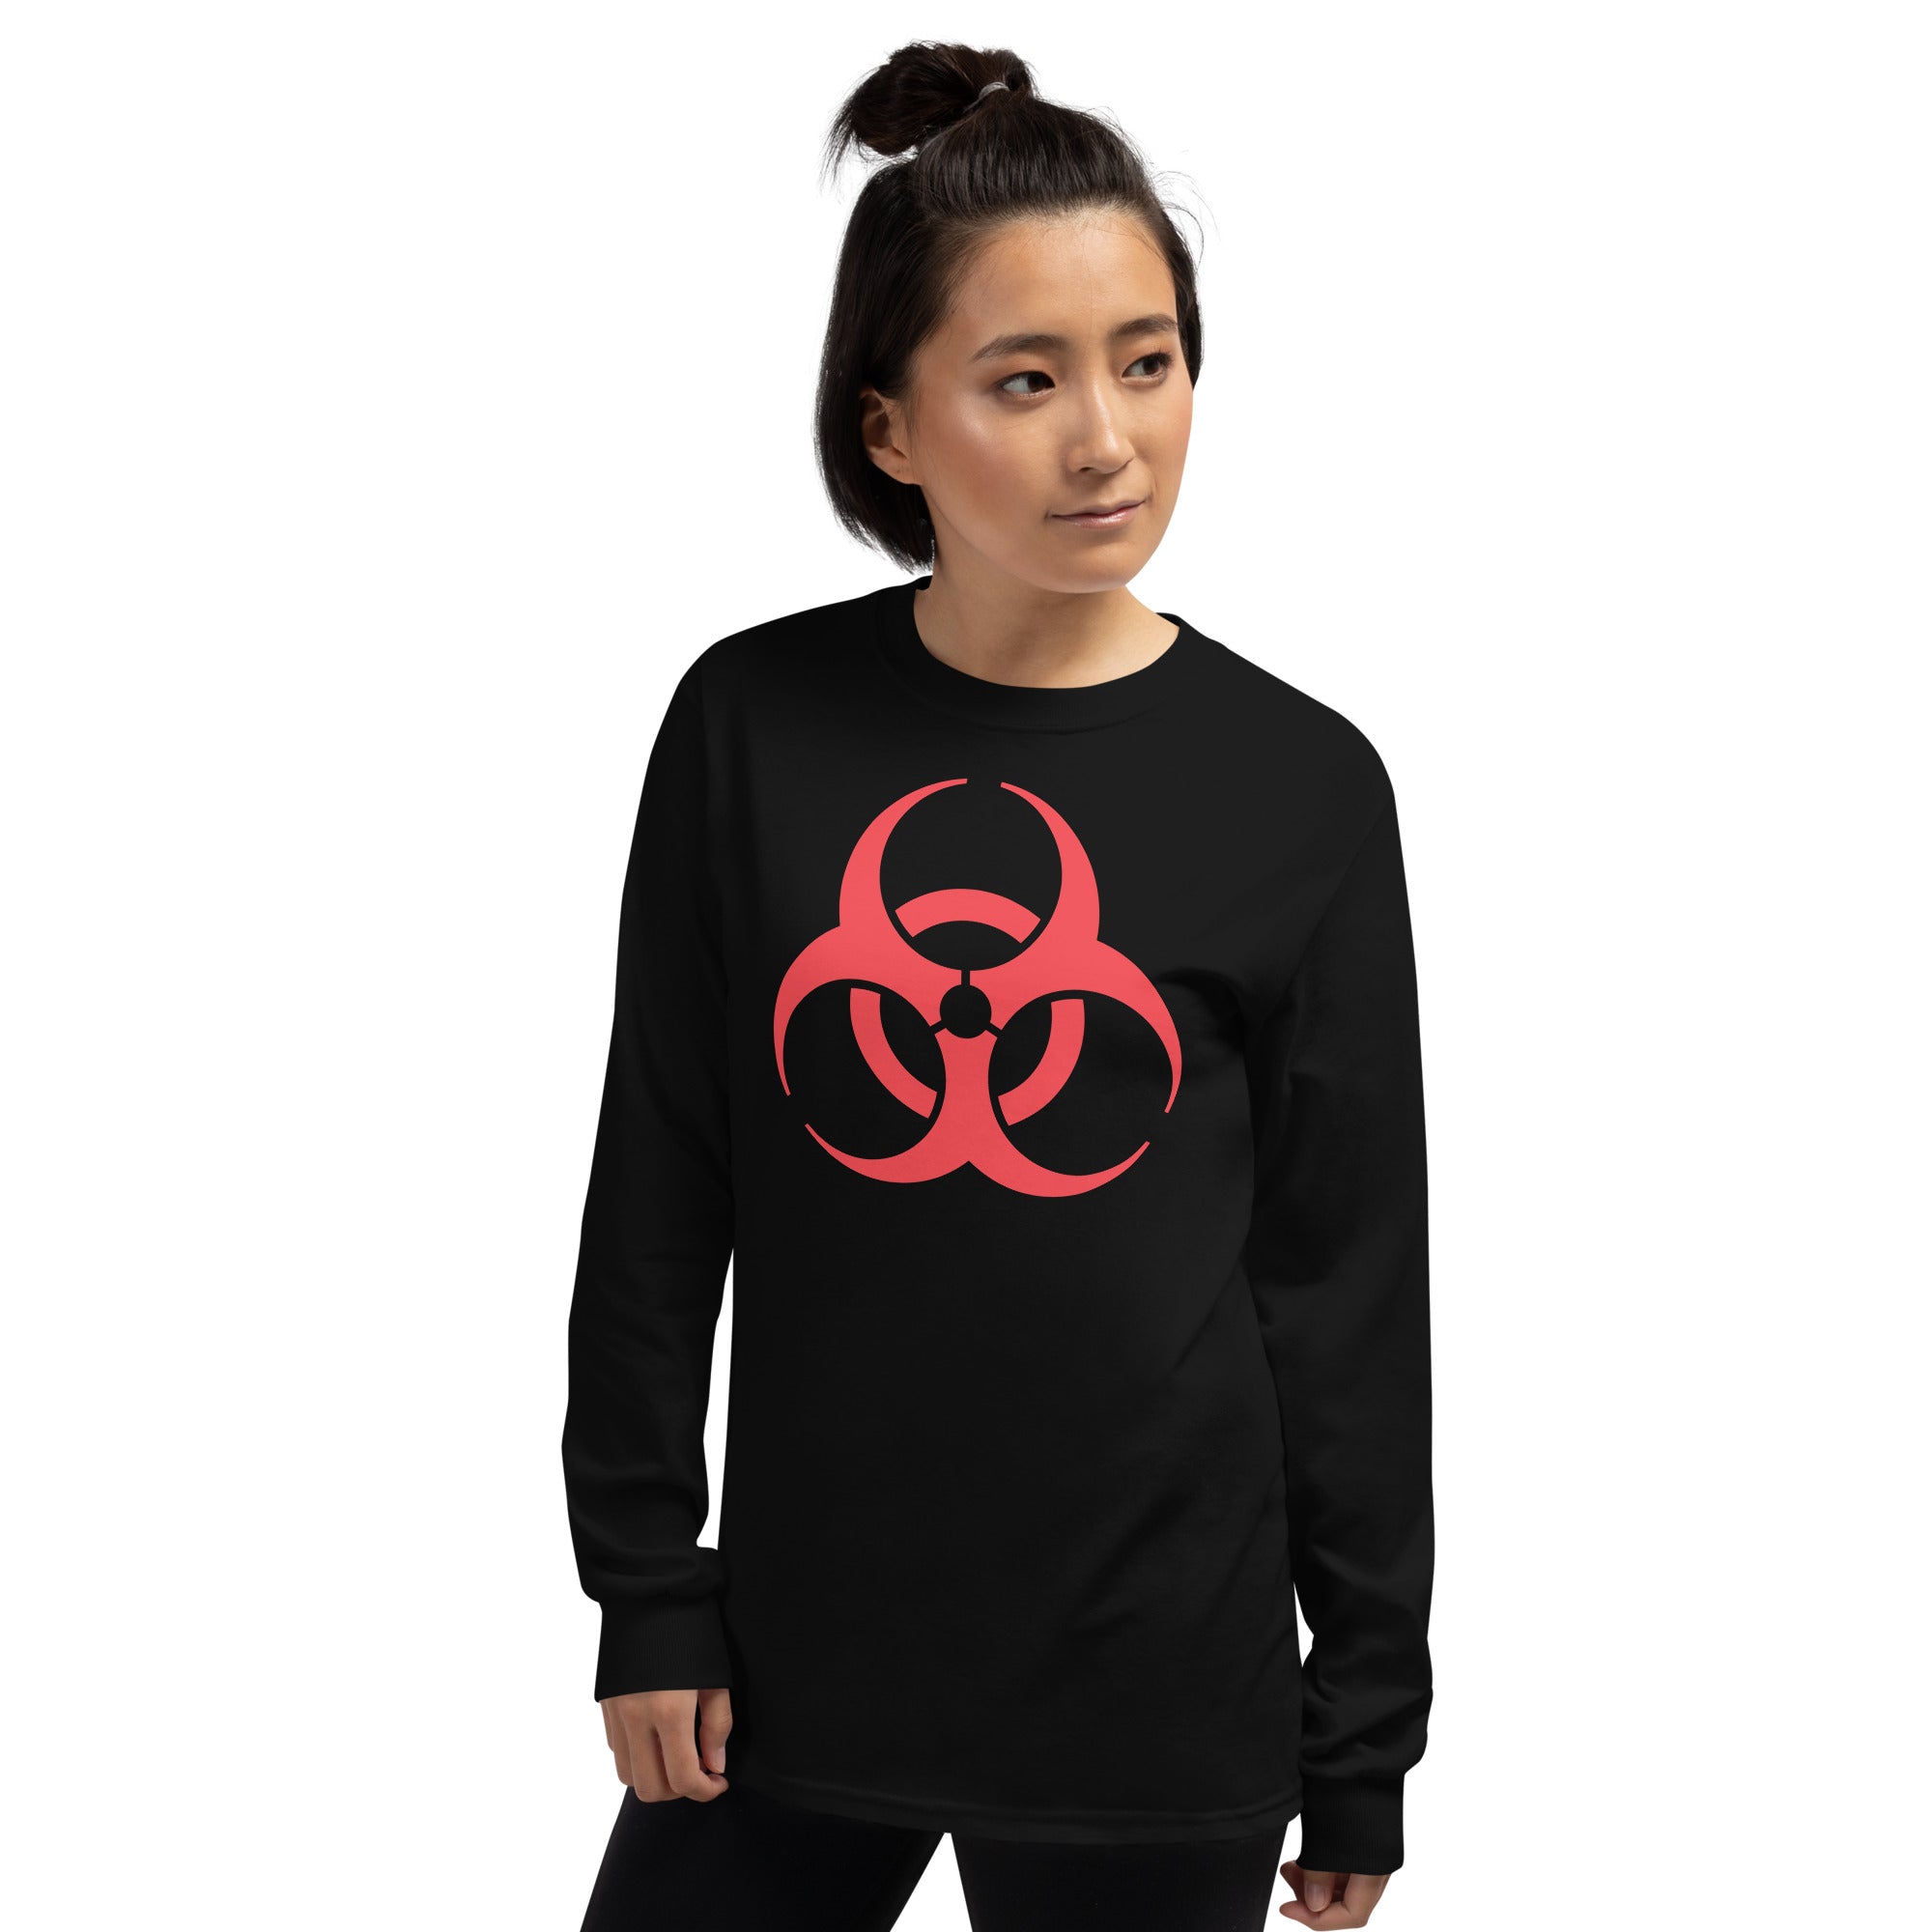 Red Biohazard Sign Toxic Chemical Symbol Long Sleeve Shirt - Edge of Life Designs